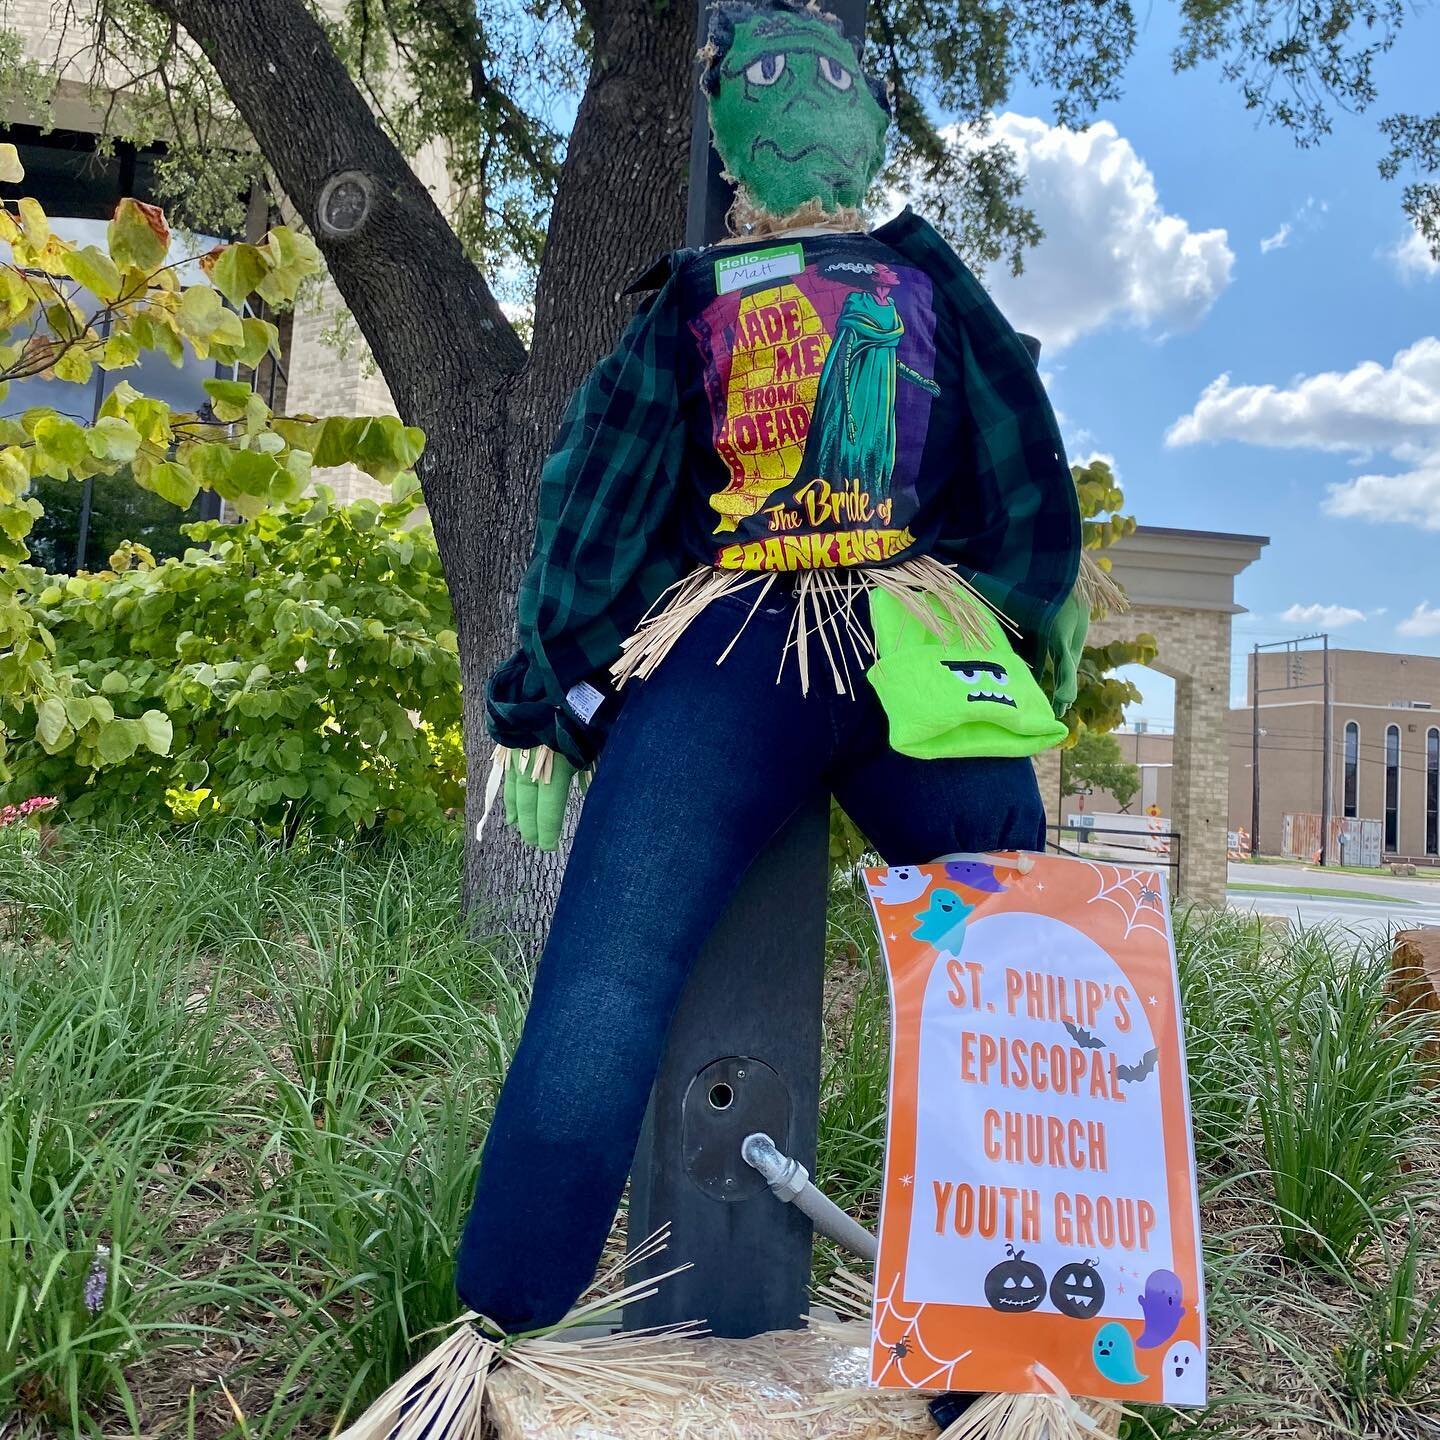 BREAKING NEWS: We got an honorable mention for Matt, our Frankenstein scarecrow, in the #CreateArdmore scarecrow contest. There were 48 entries and only 8 were mentioned, so that&rsquo;s super cool! Thanks to the youth and volunteers who put this tog